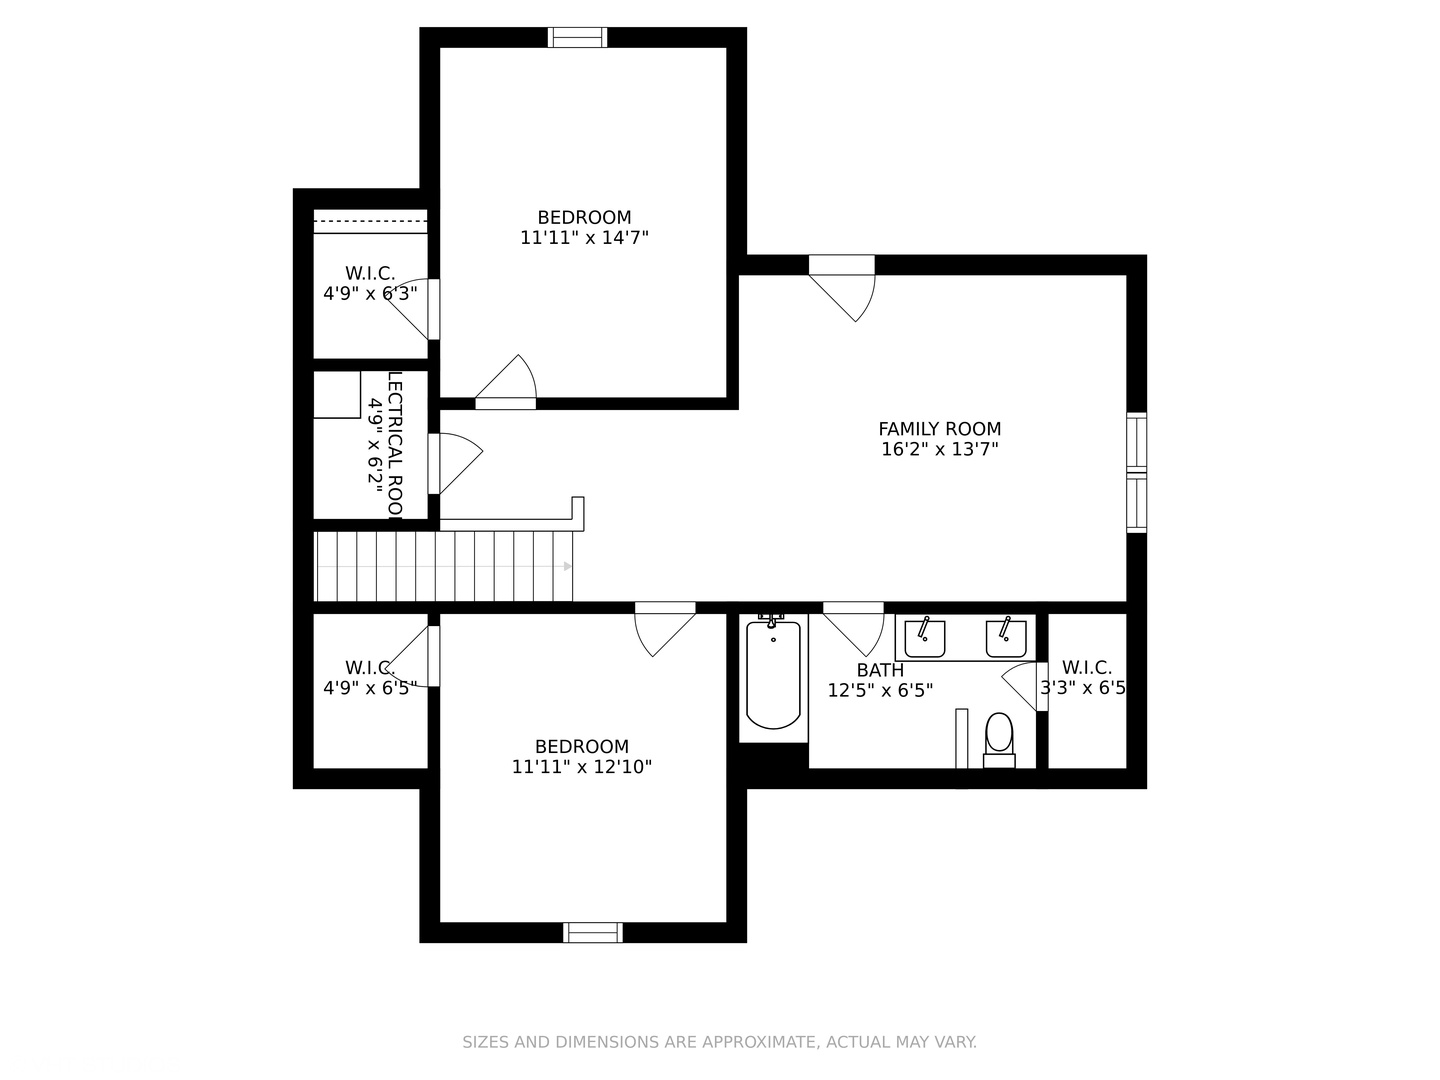 Second floor layout of Stay Gold